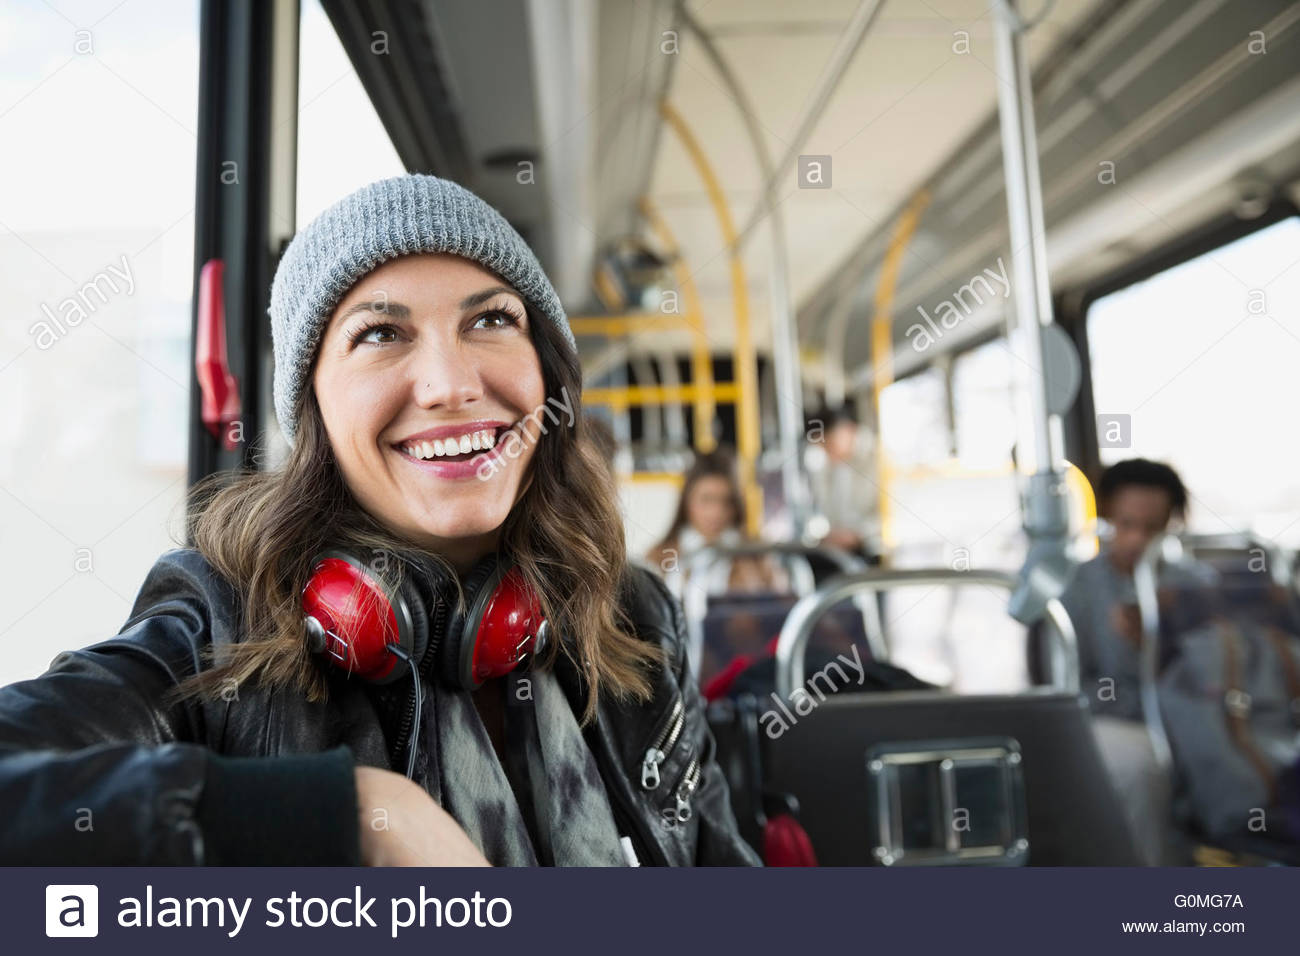 Smiling woman with headphones riding bus Stock Photo